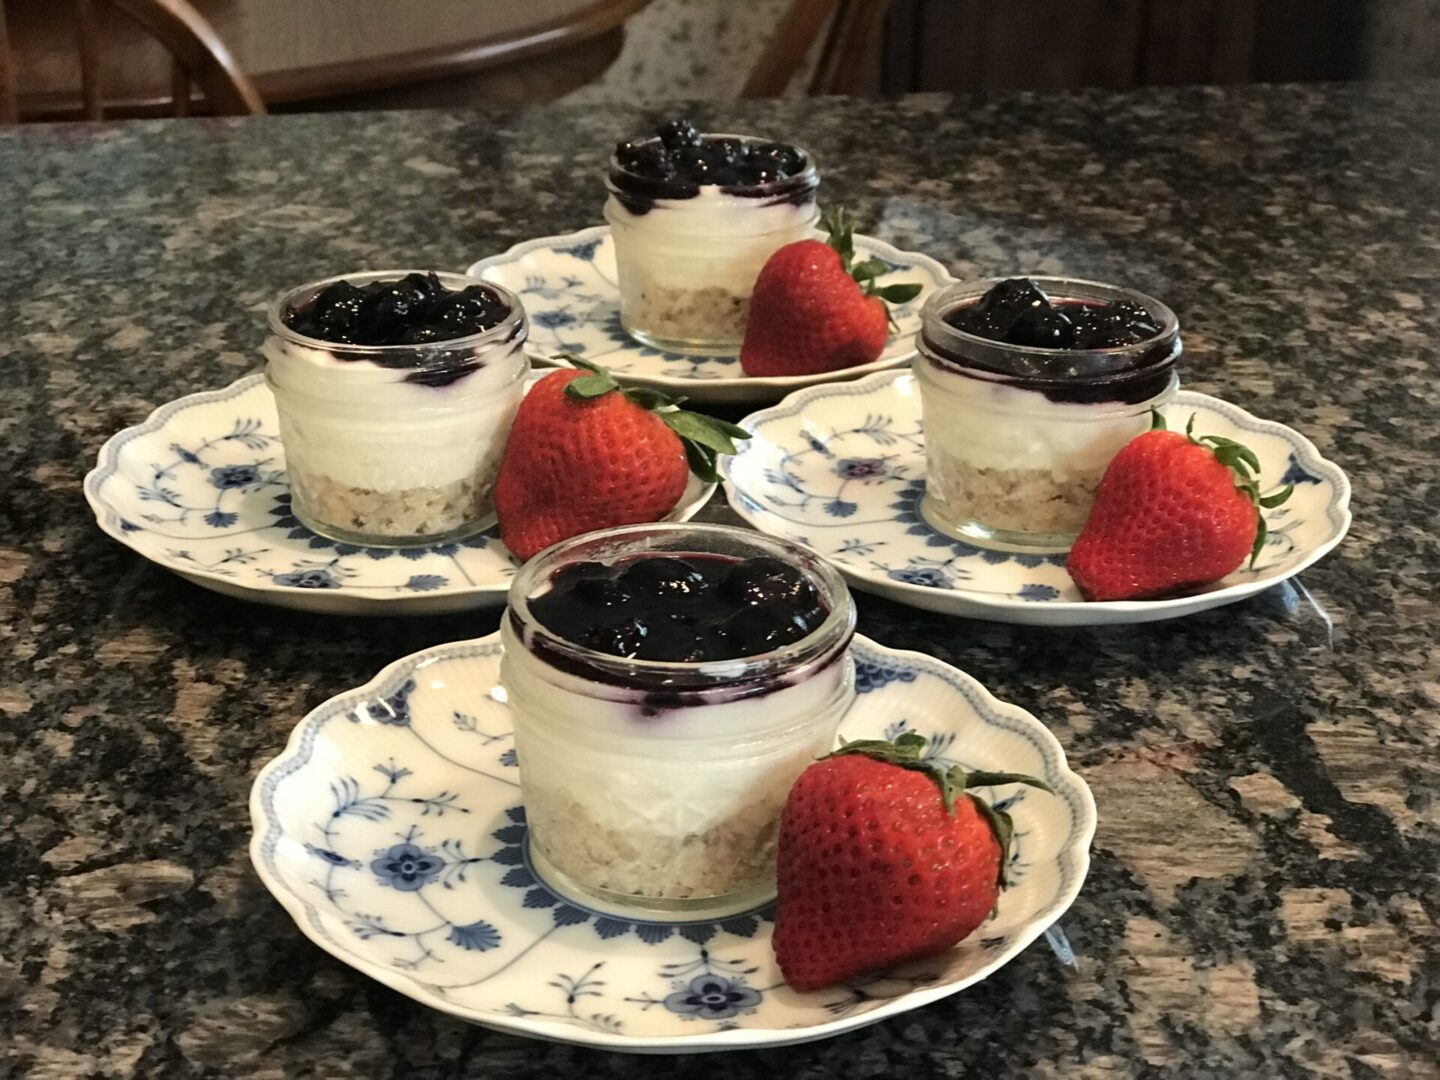 A group of four plates with some strawberries and jars.